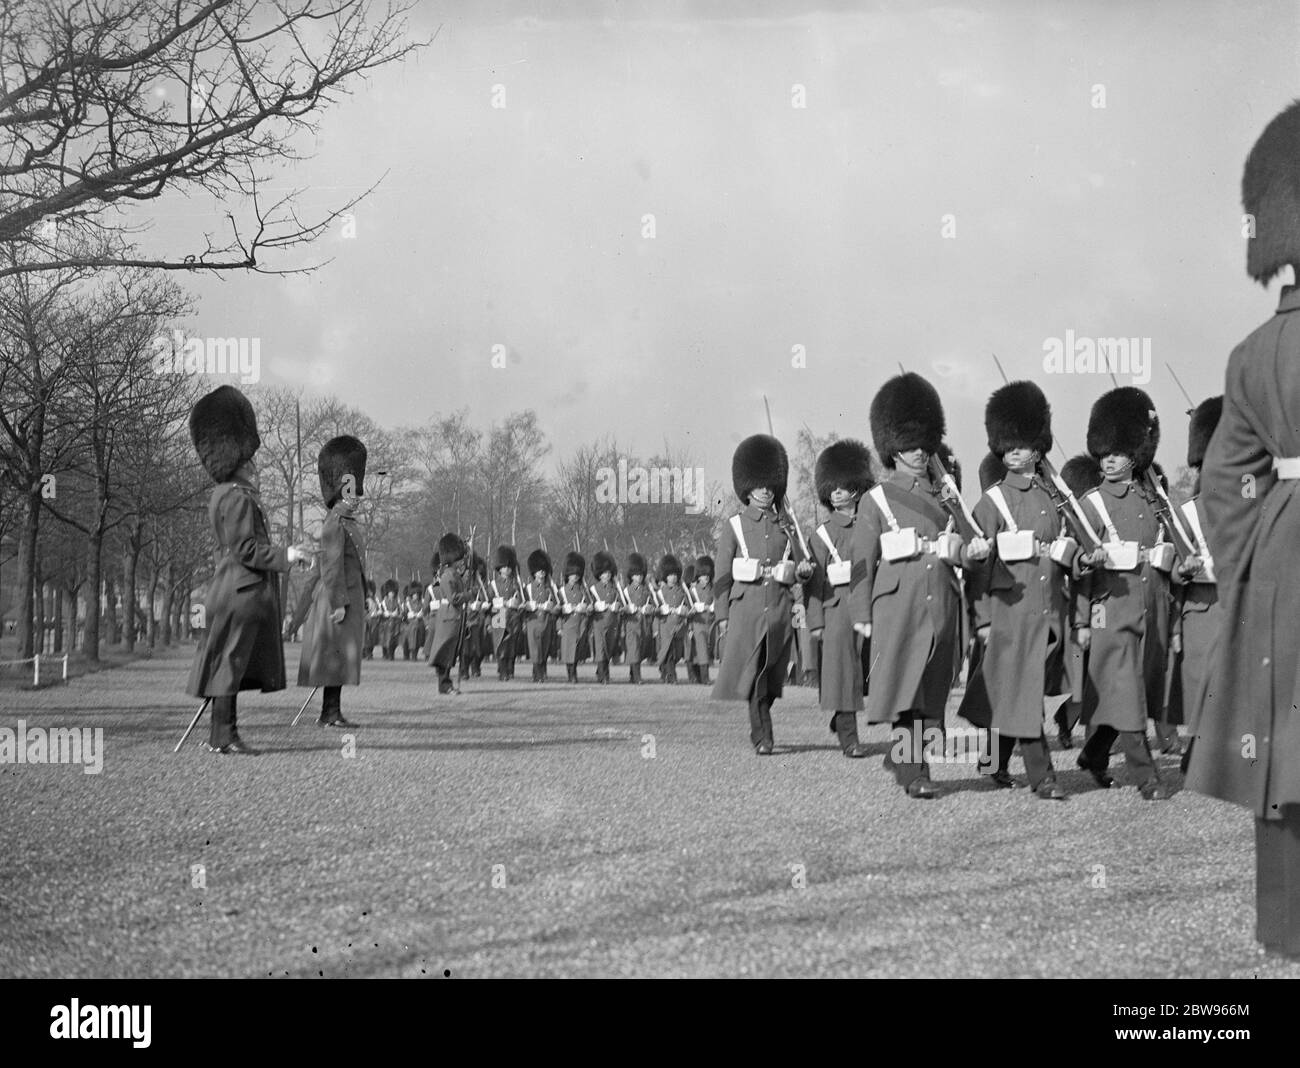 Prince of Wales inspects his regiment on St Davids day at Aldershot . The Prince of Wales inspected the 1st Battalion Welsh Guards , of which he is colonel in Chief at their barracks at Aldershot on St Davids day . The Prince of Wales saluting the regimental Colours as they were carried past him on the parade ground . 1 March 1932 Stock Photo